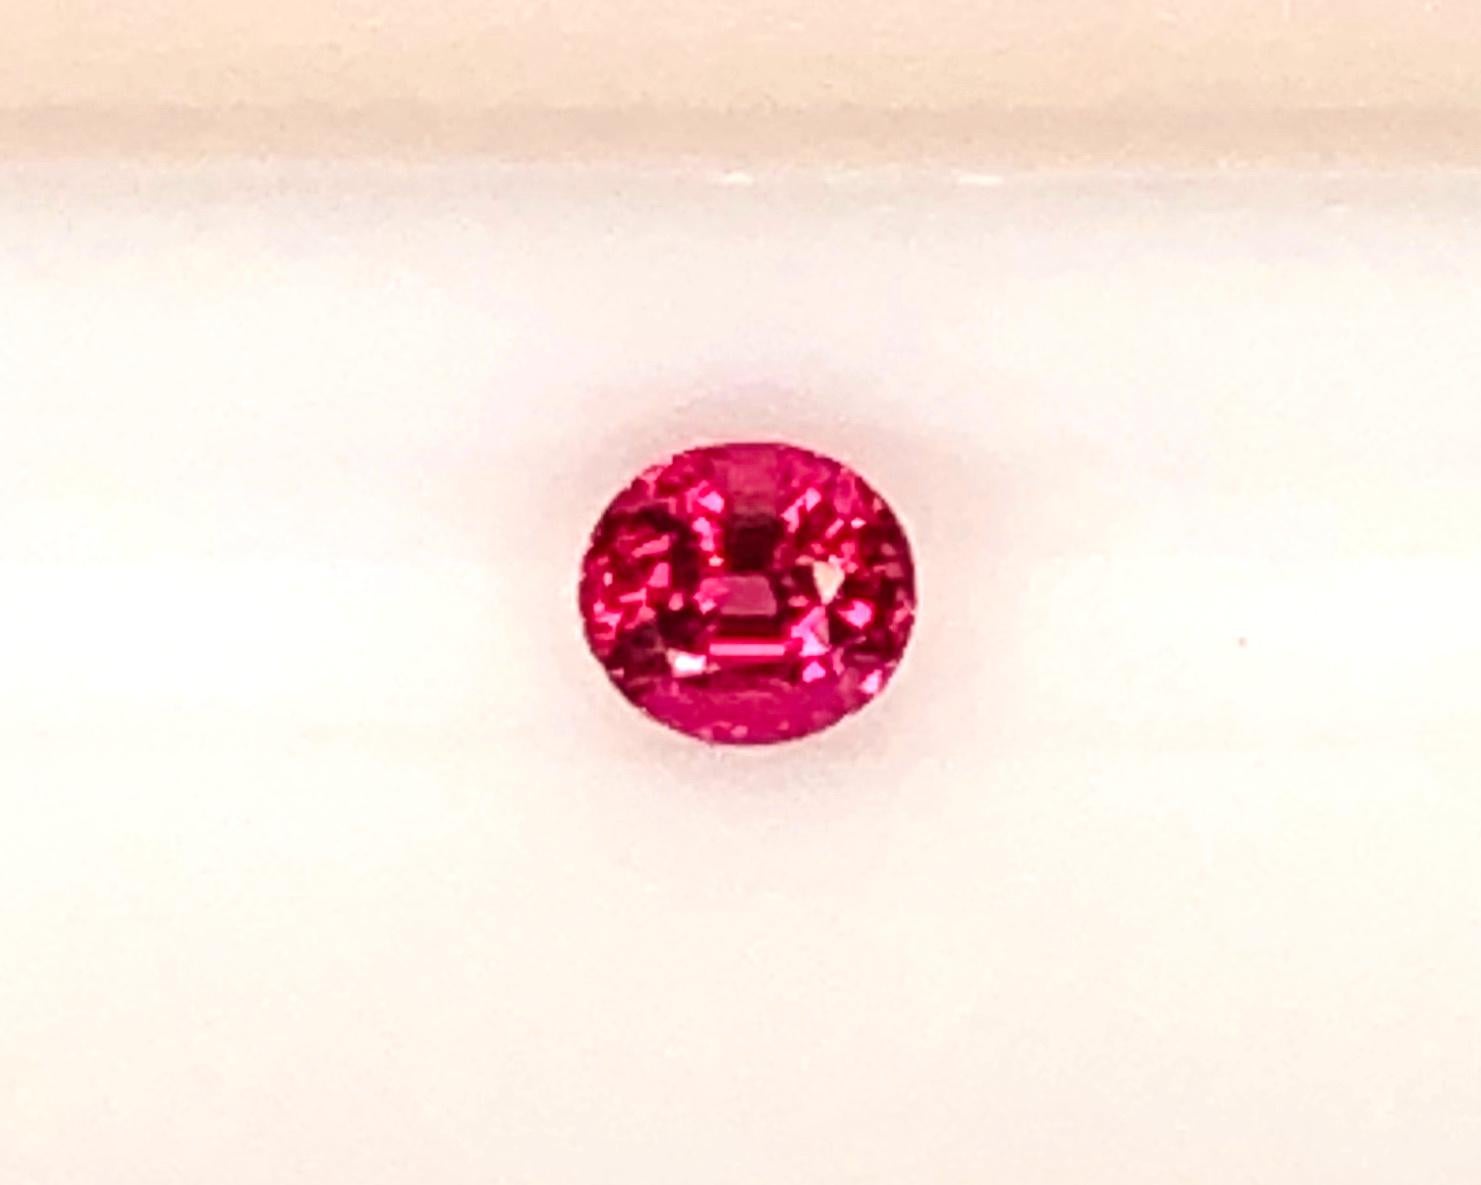 Privately Curated Collection of Unset Loose Fancy Spinel Gemstones, 89.77 Carats 9